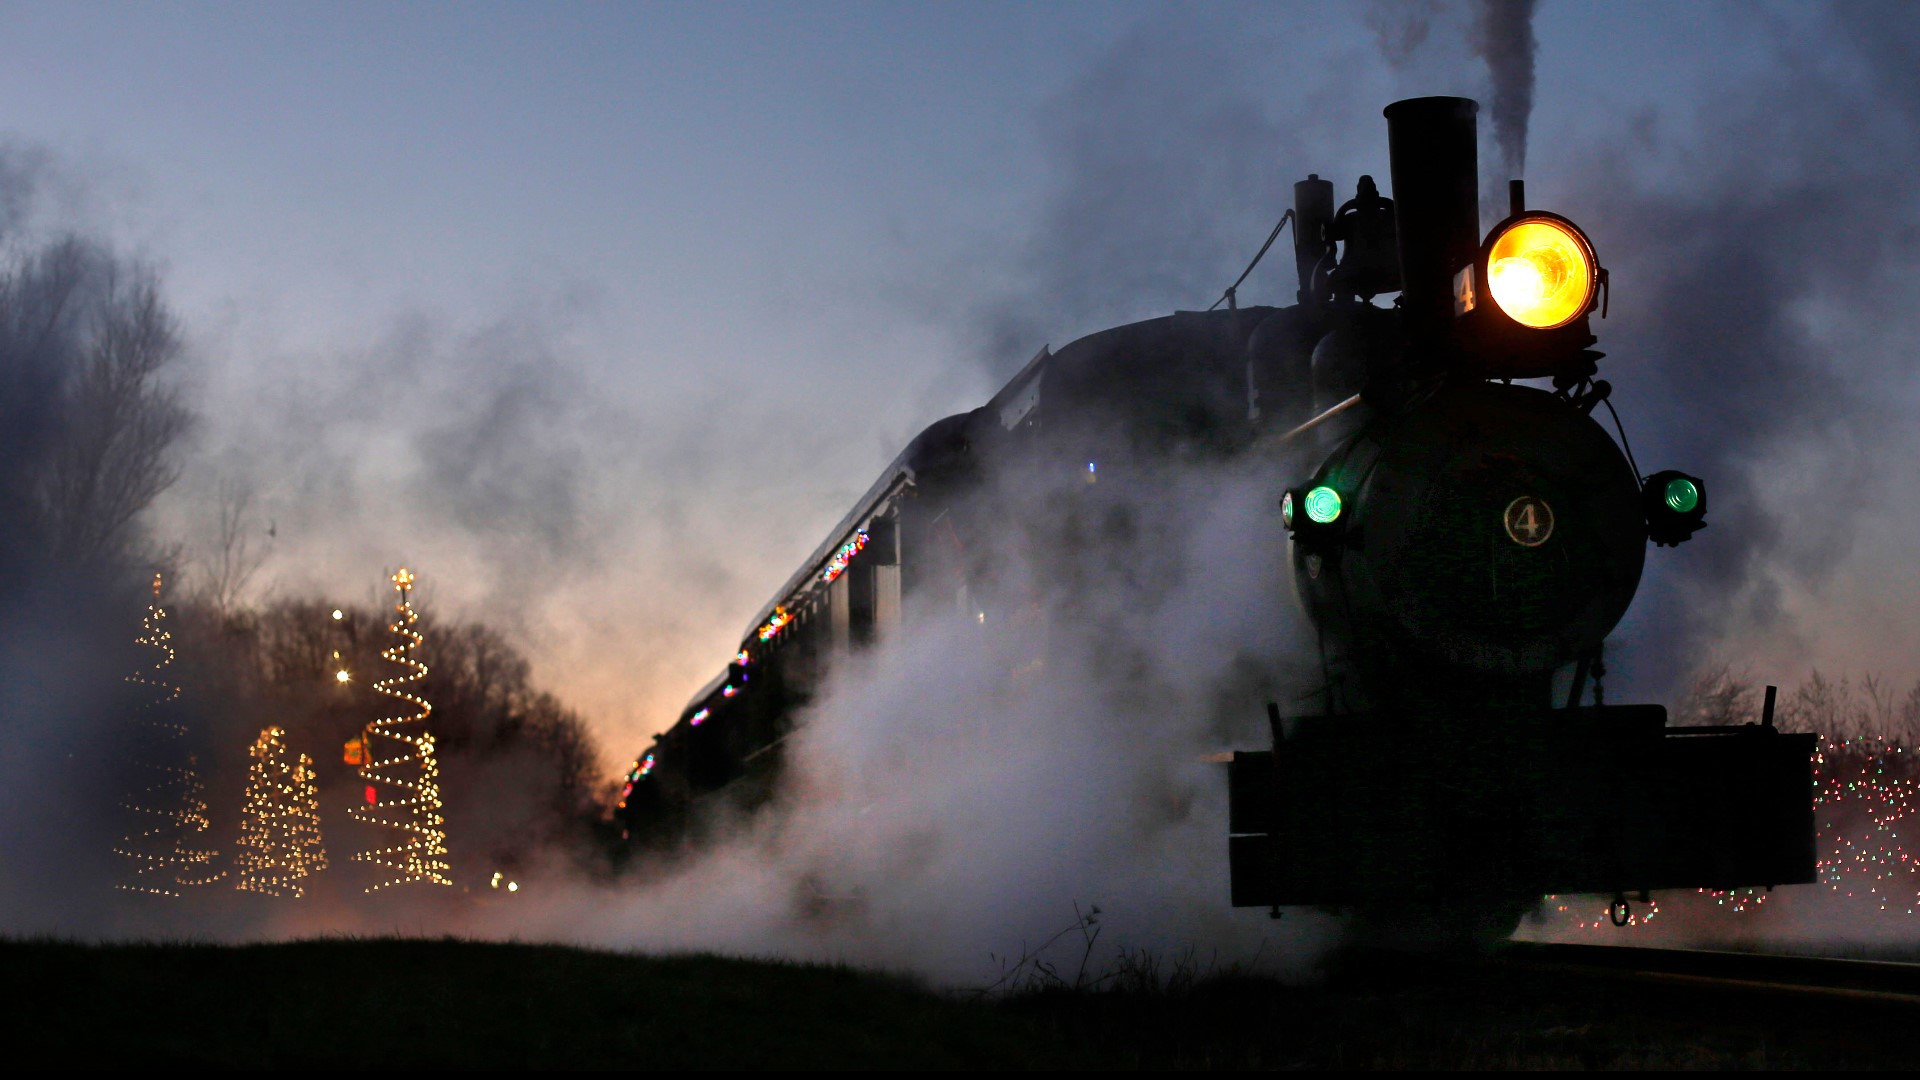 How to get tickets for the Galveston Polar Express train ride